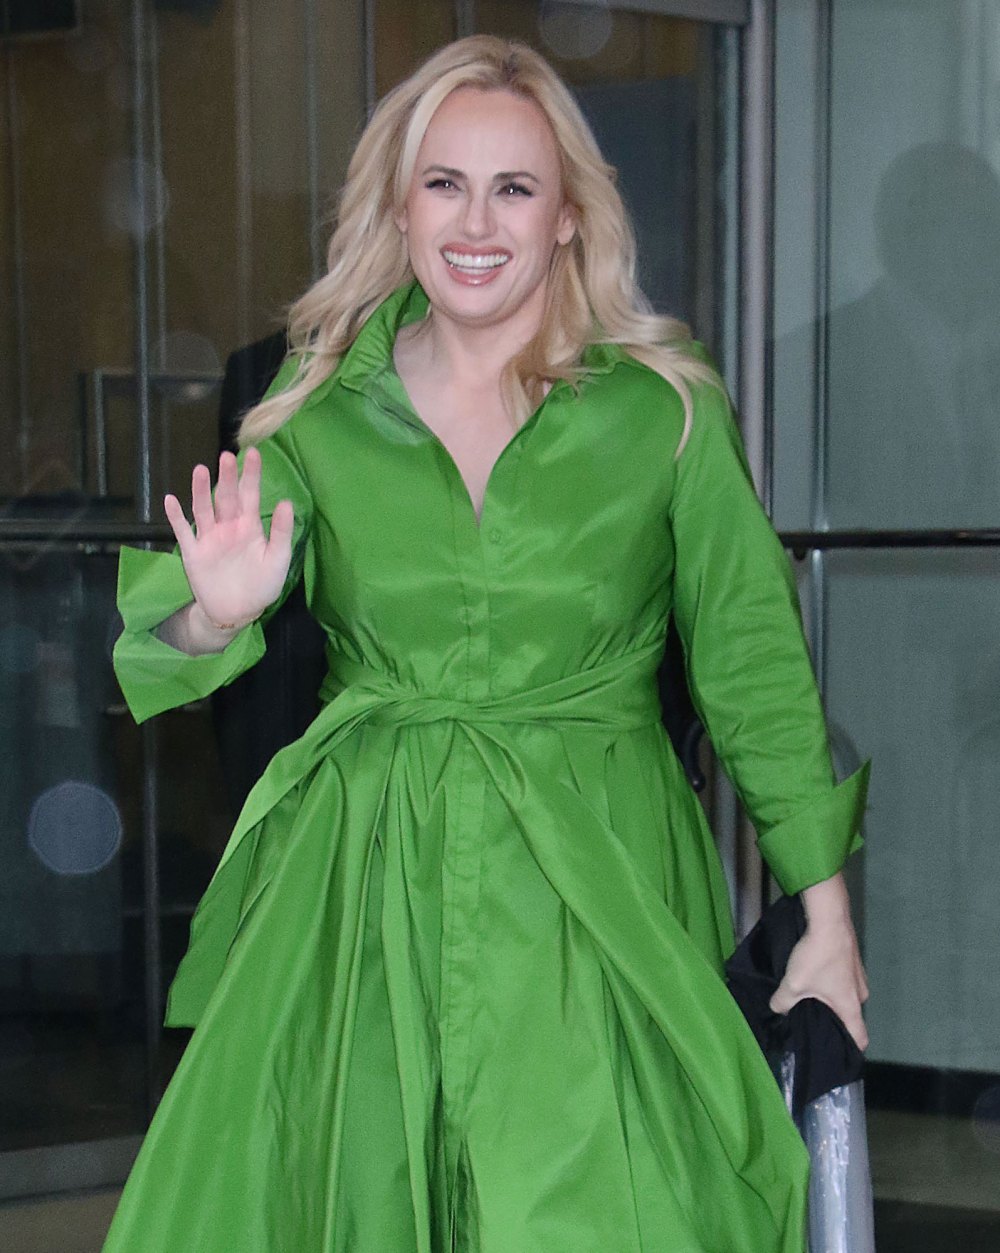 Rebel Wilson Claims Meghan Markle 'Was Not as Cool' to Her as Prince Harry During 1st Encounter green dress